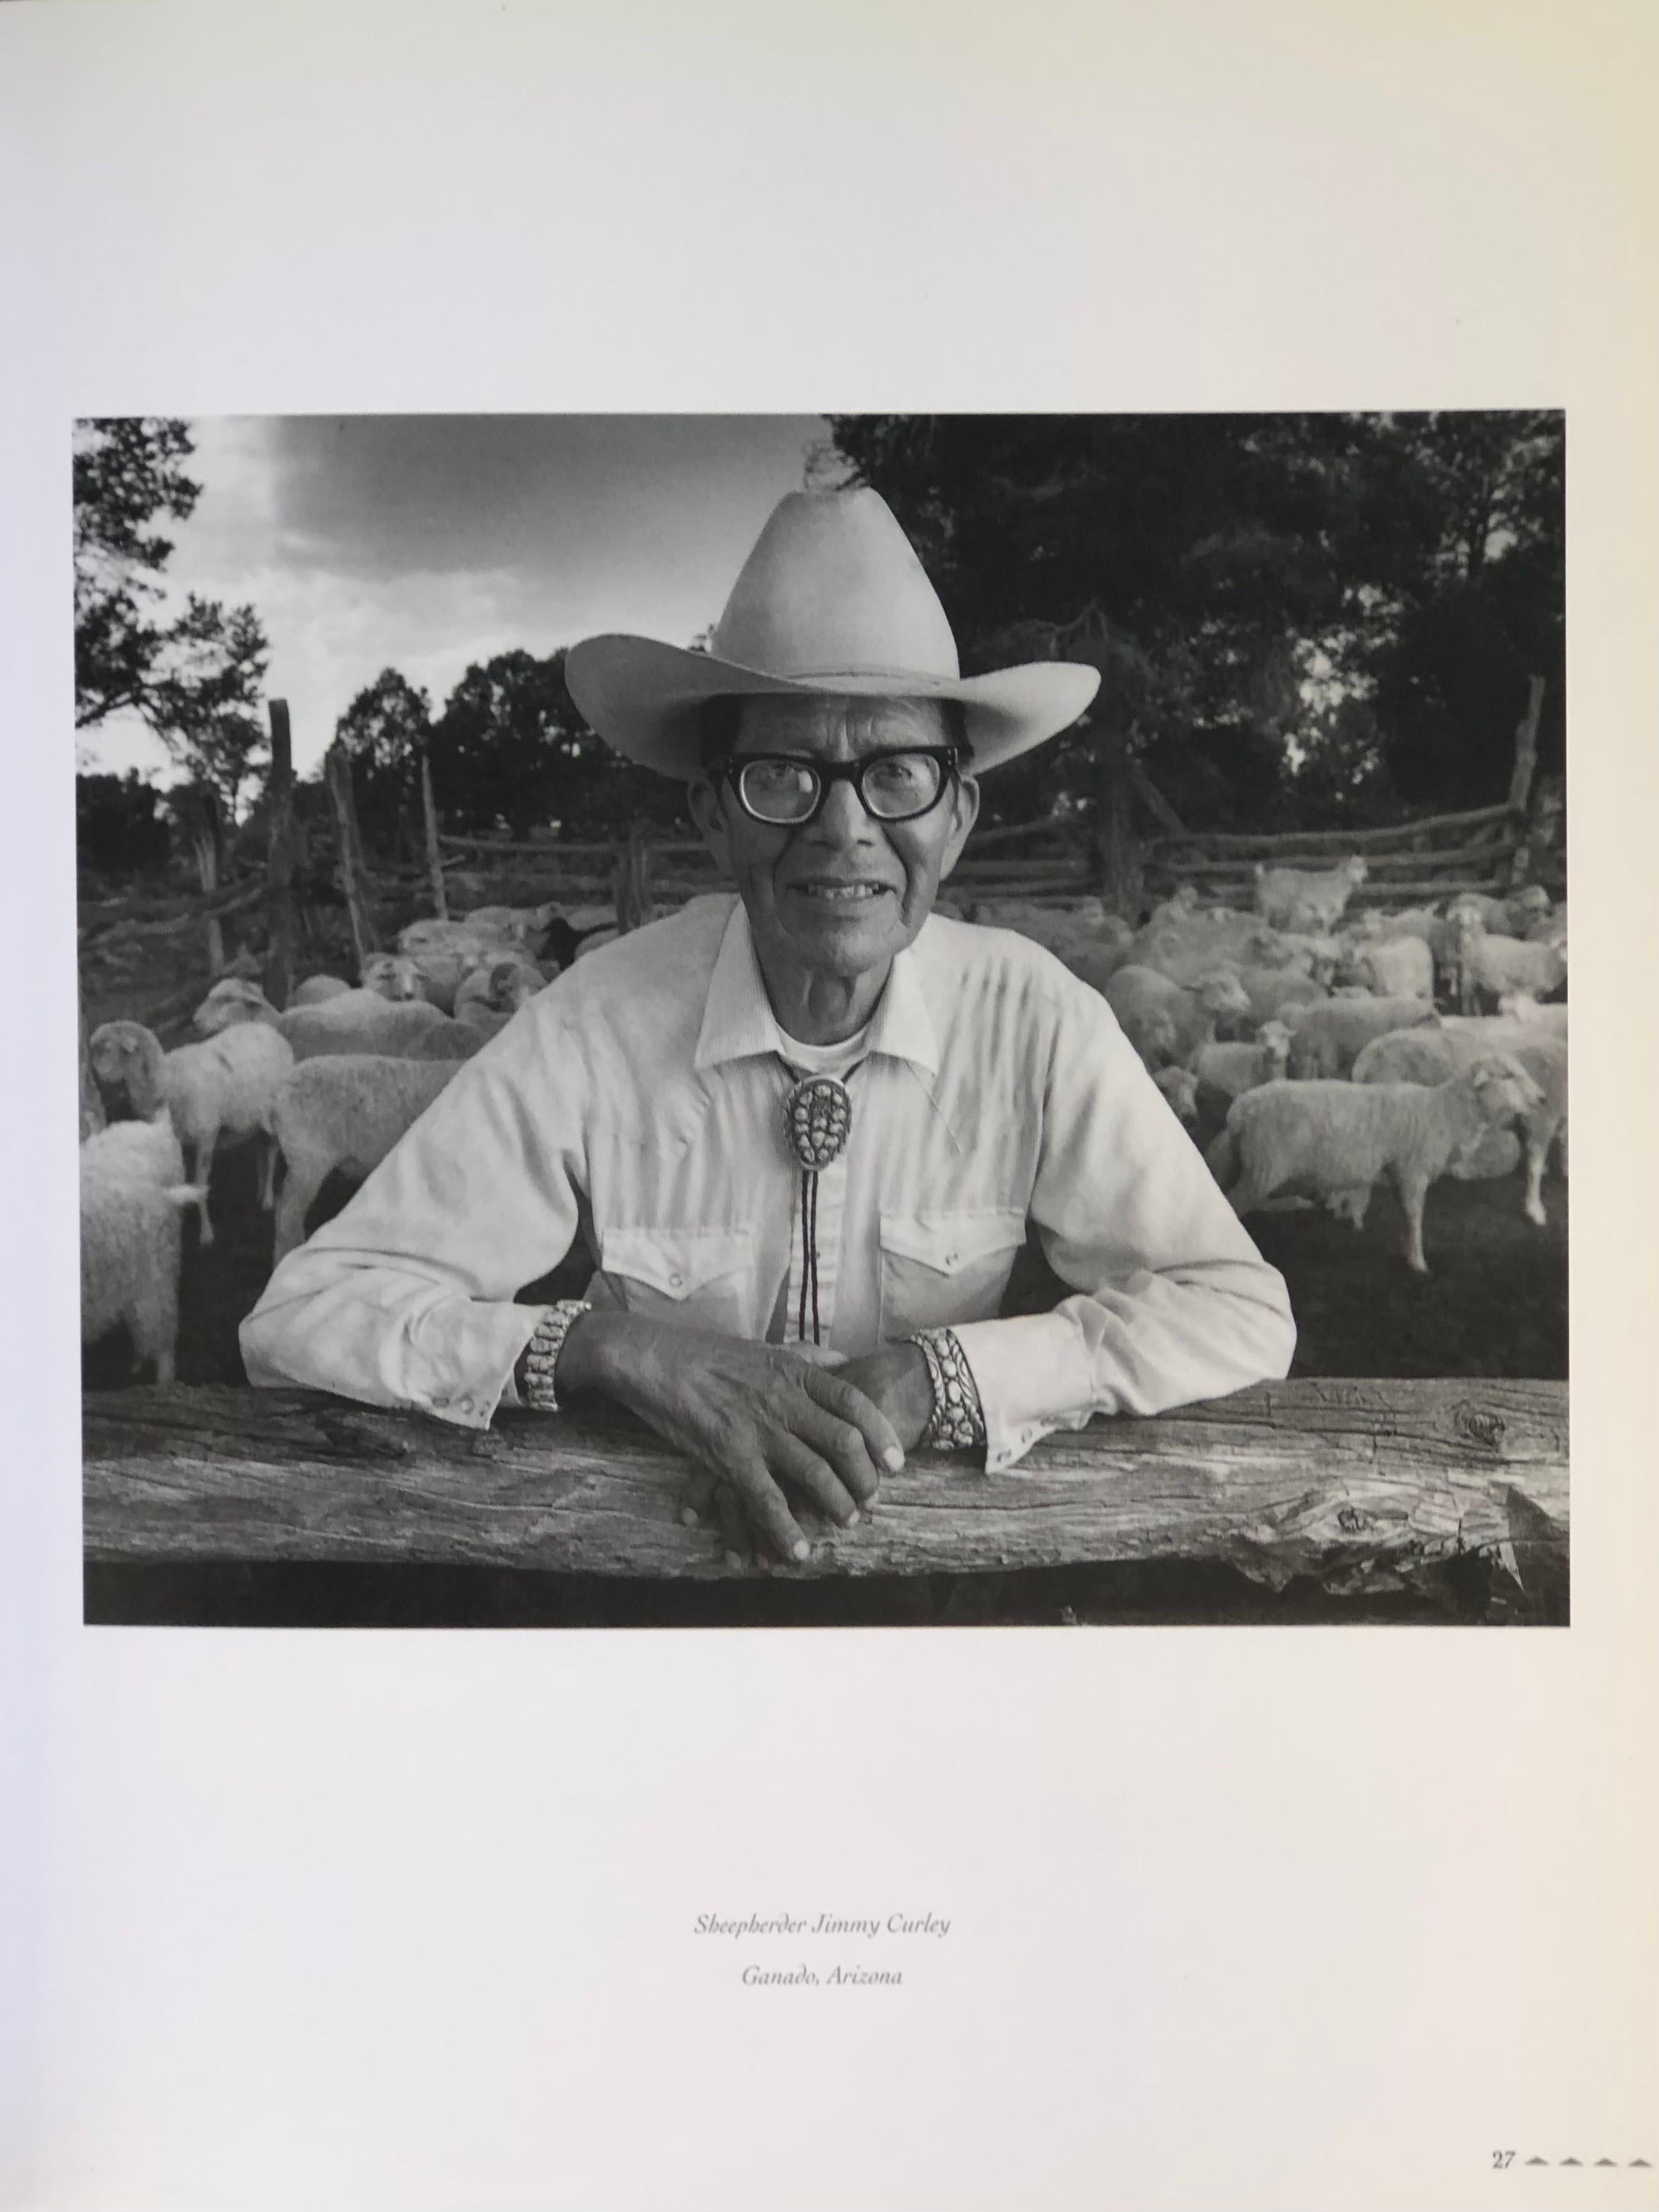 Navajo - Portrait of a Nation, photography by Joel Grimes. Softcover book. First edition, published in 1992 by Westcliffe Publishers Inc. of Englewood, Colorado. Printed in Singapore. 192 pages.
